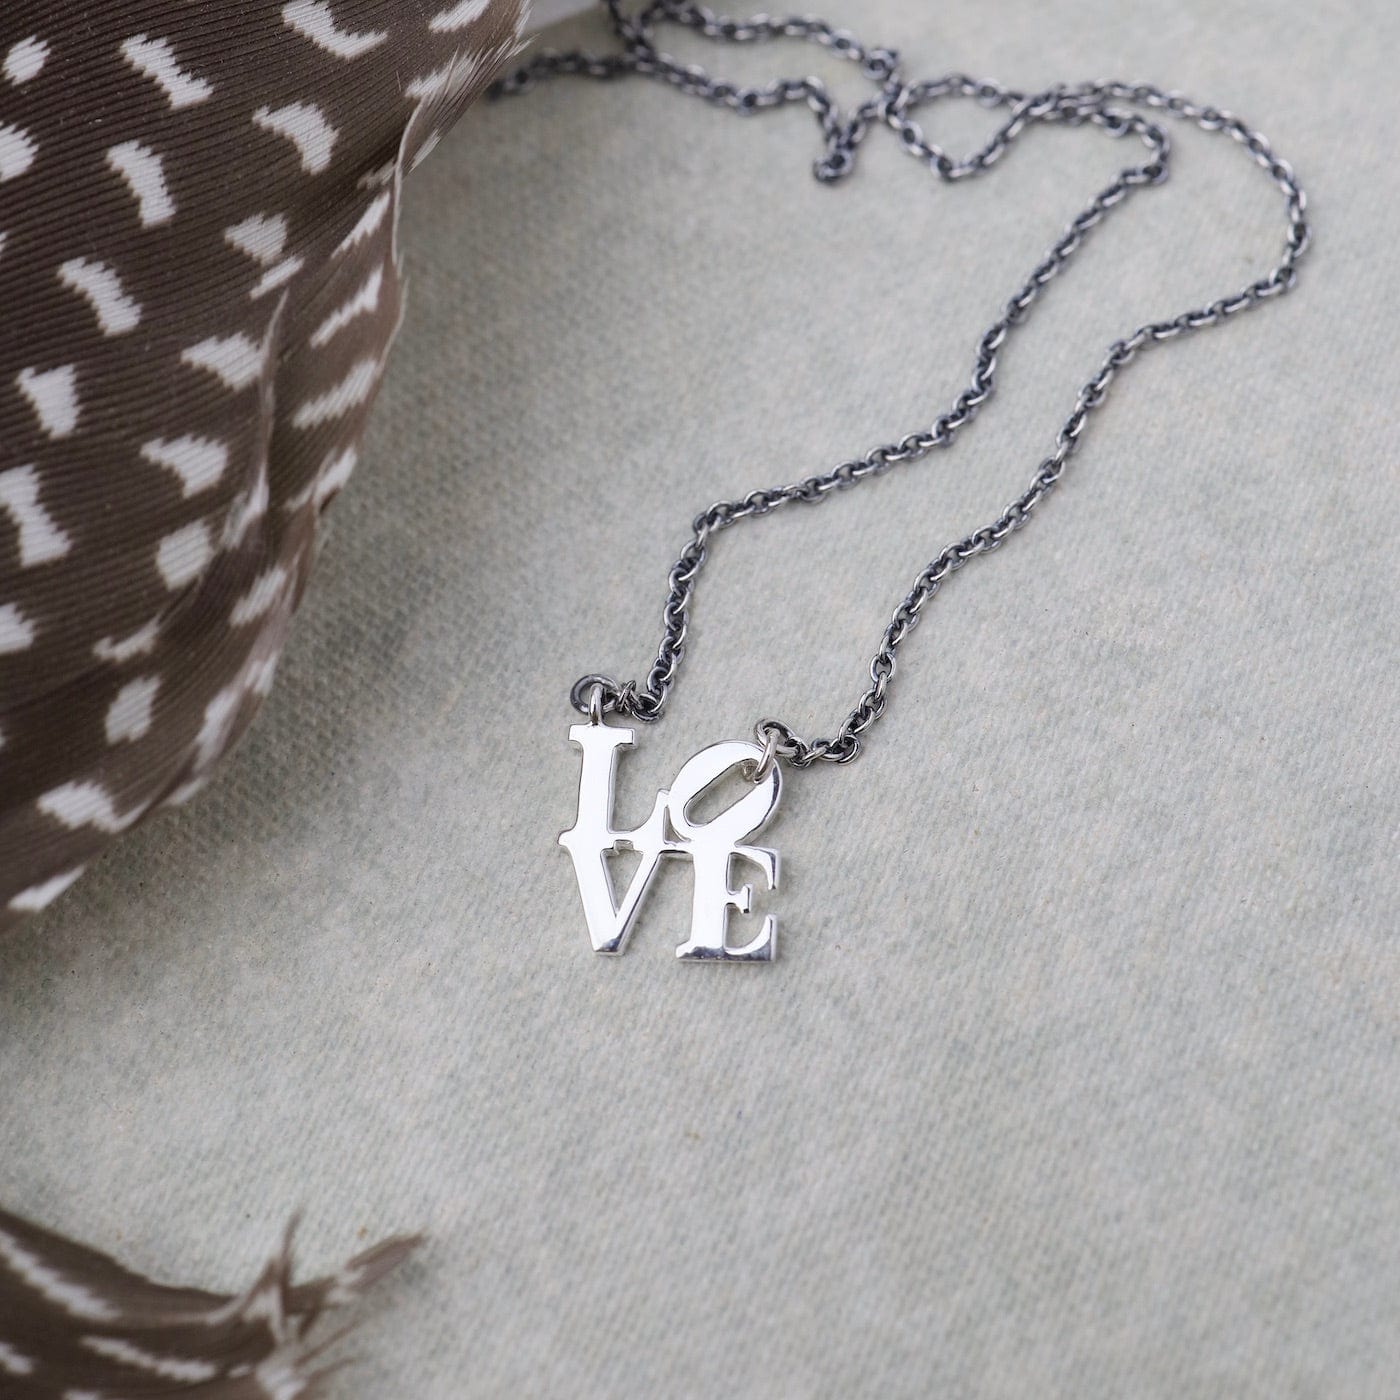 NKL Oxidized Silver Chain LOVE Necklace